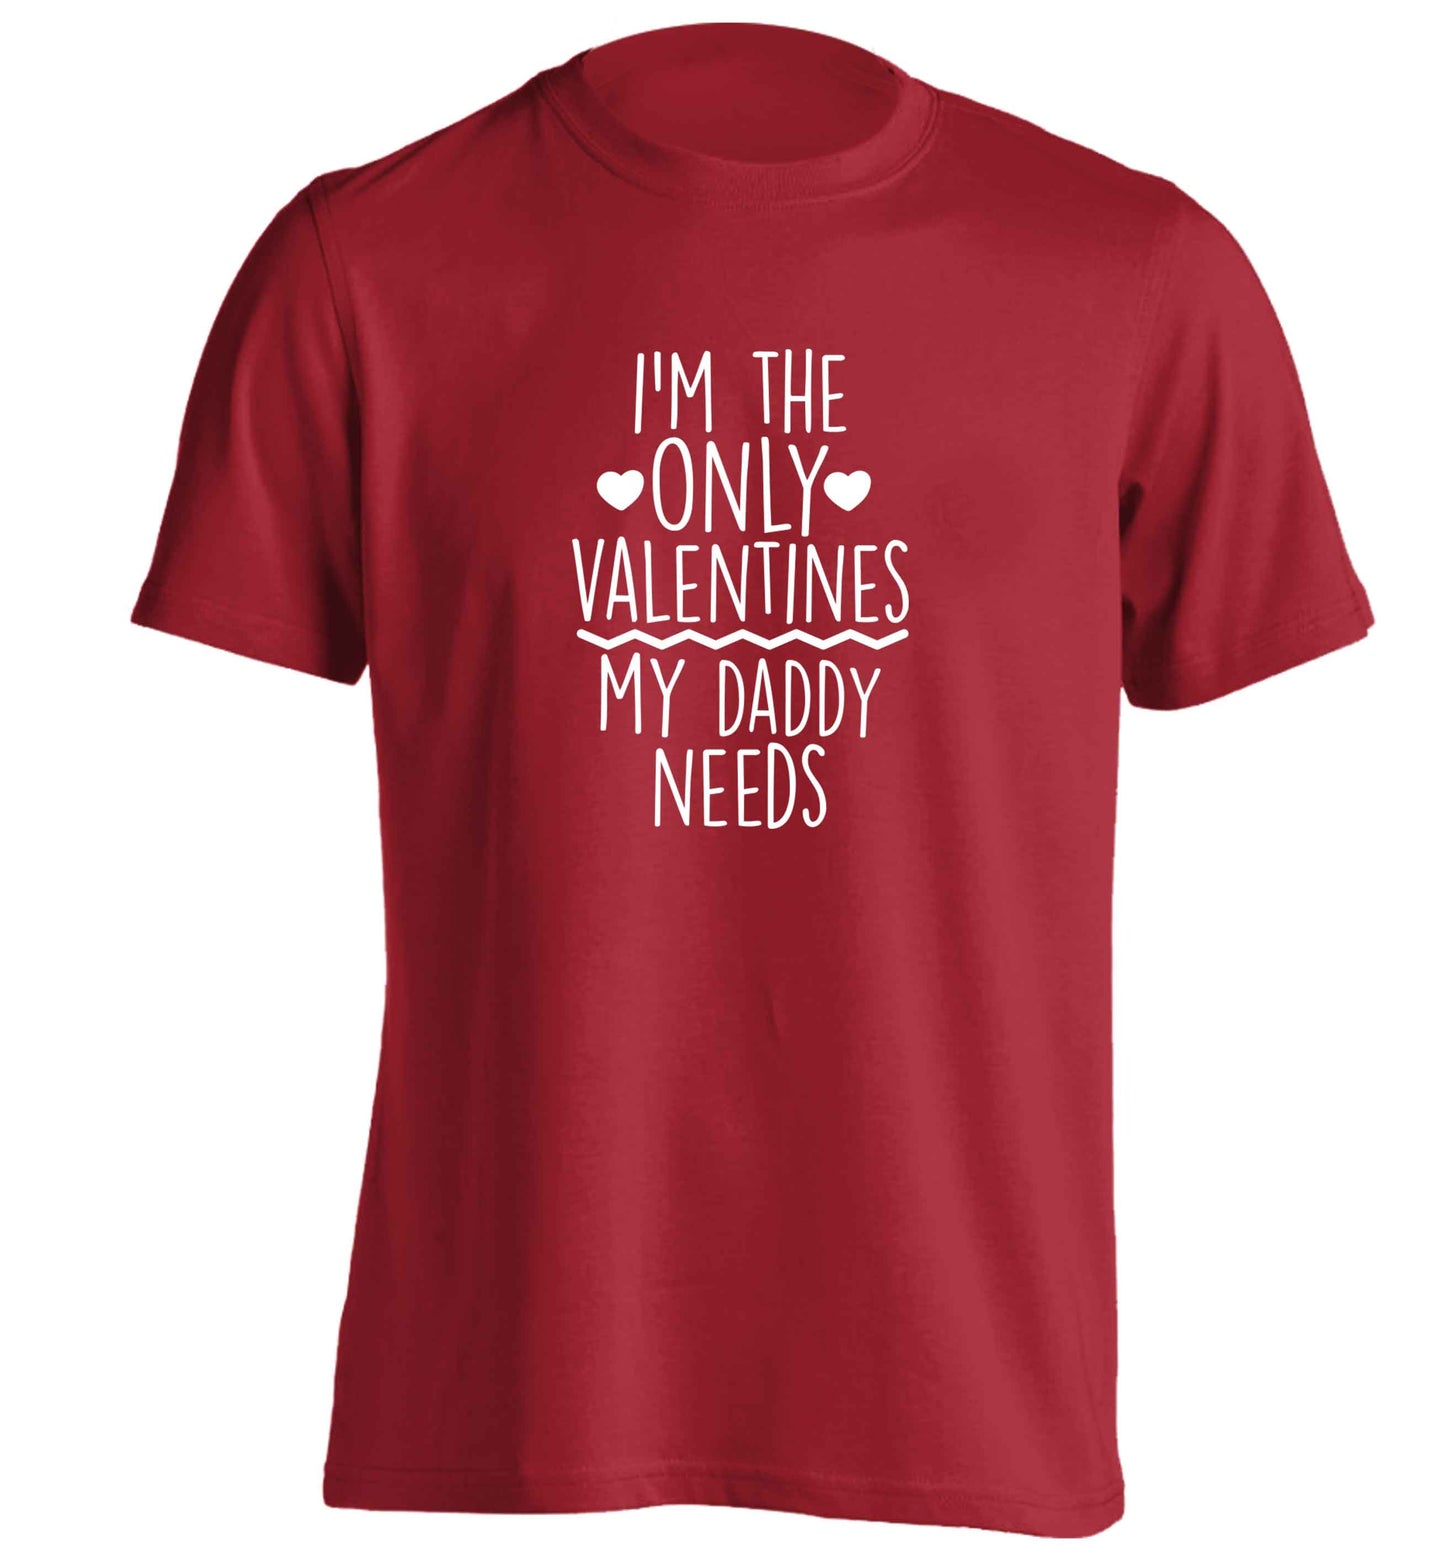 I'm the only valentines my daddy needs adults unisex red Tshirt 2XL